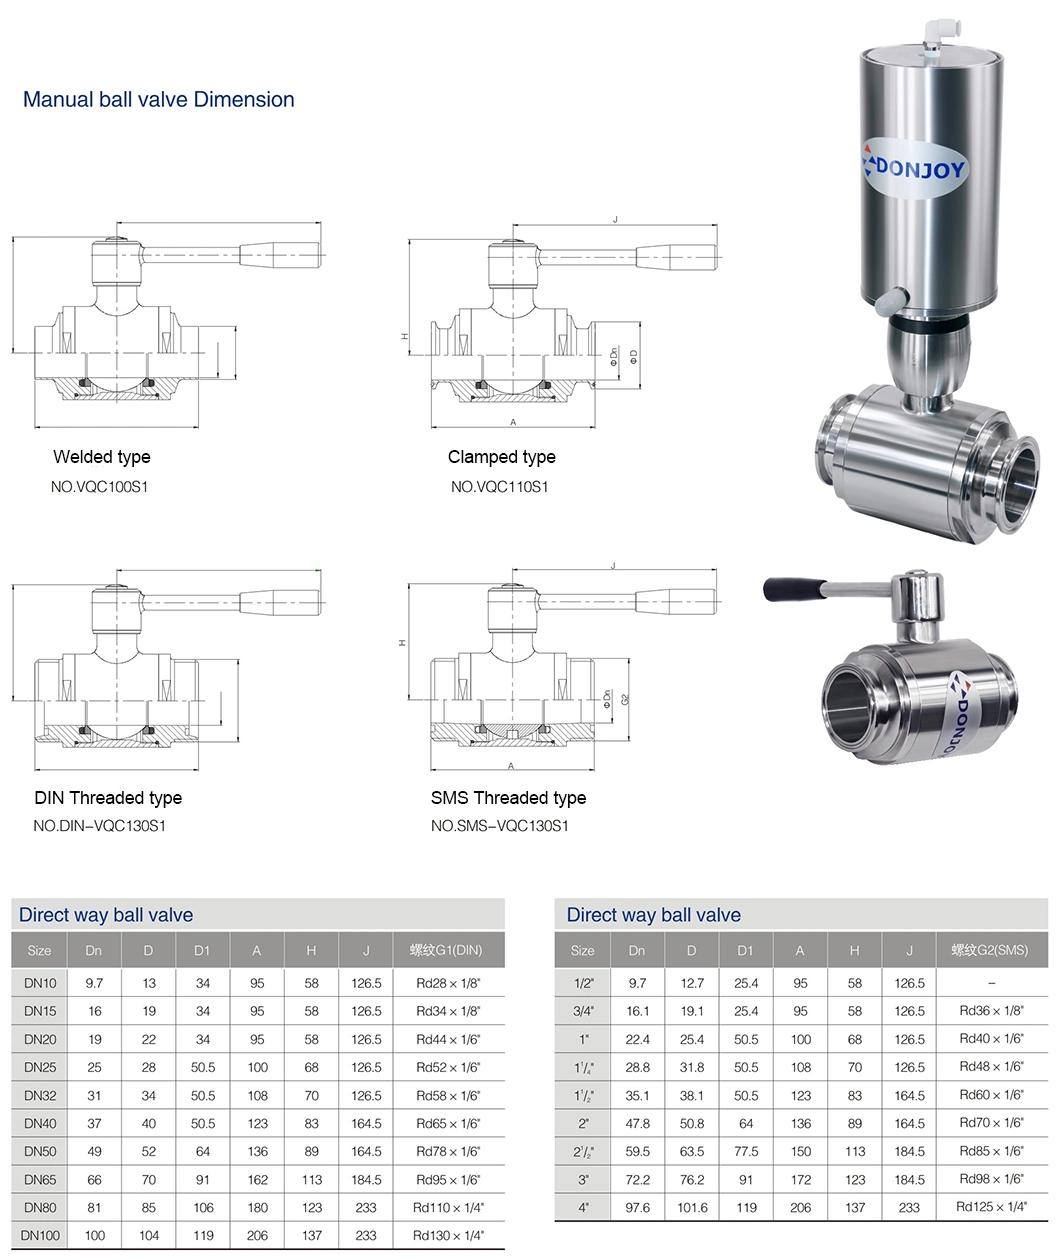 Donjoy Sanitary Direct Cross Ball Valve with C-Top